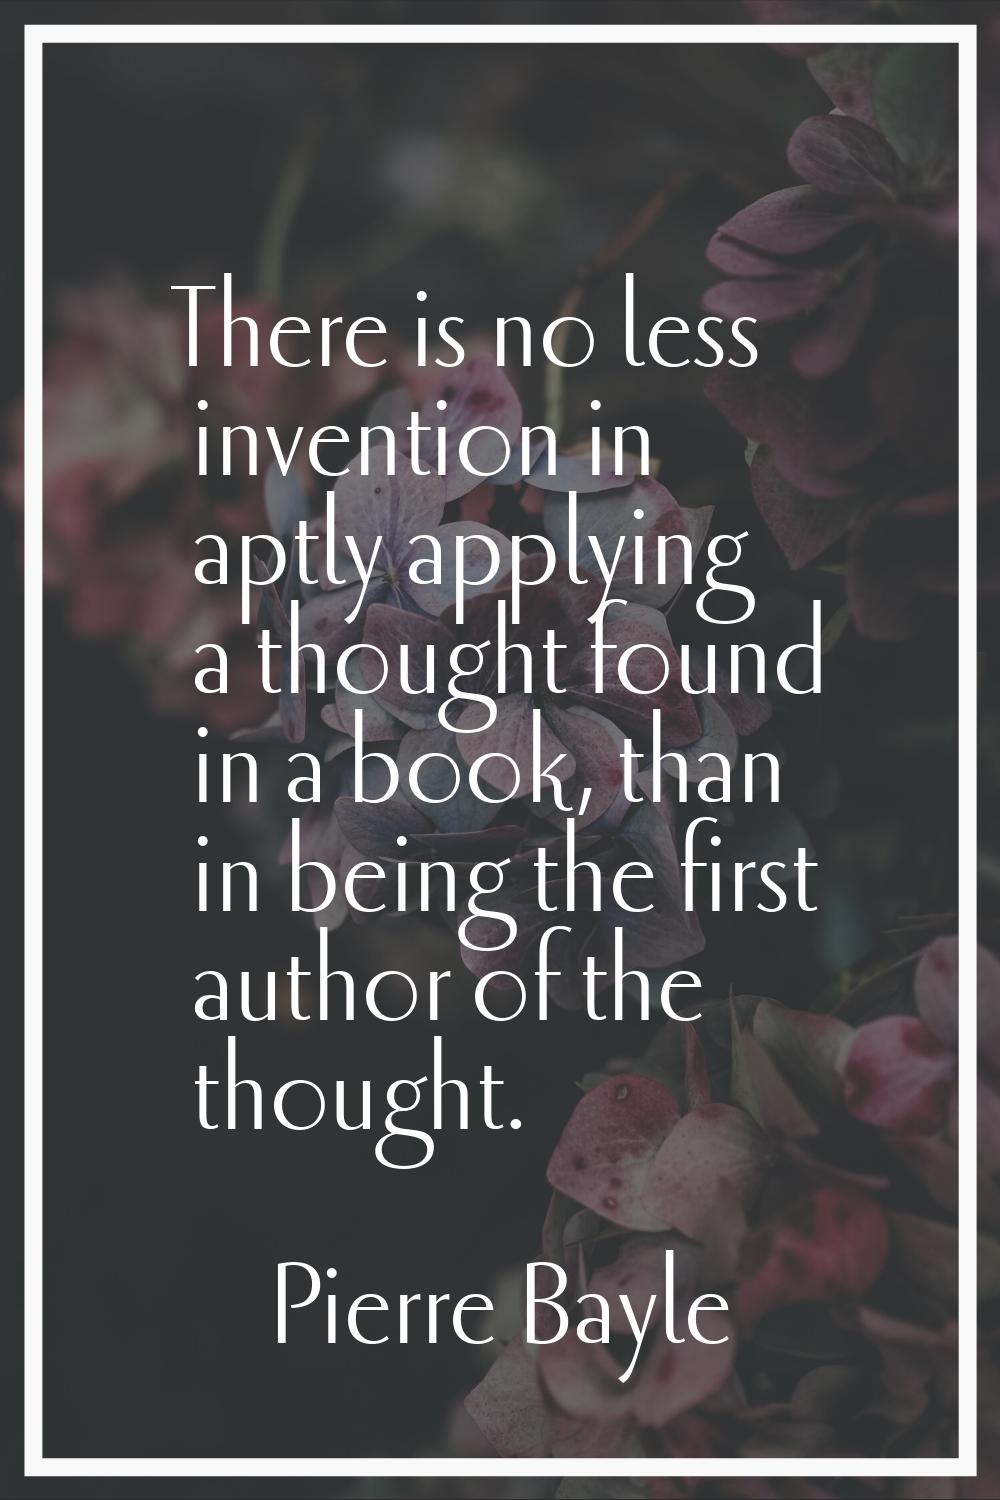 There is no less invention in aptly applying a thought found in a book, than in being the first aut